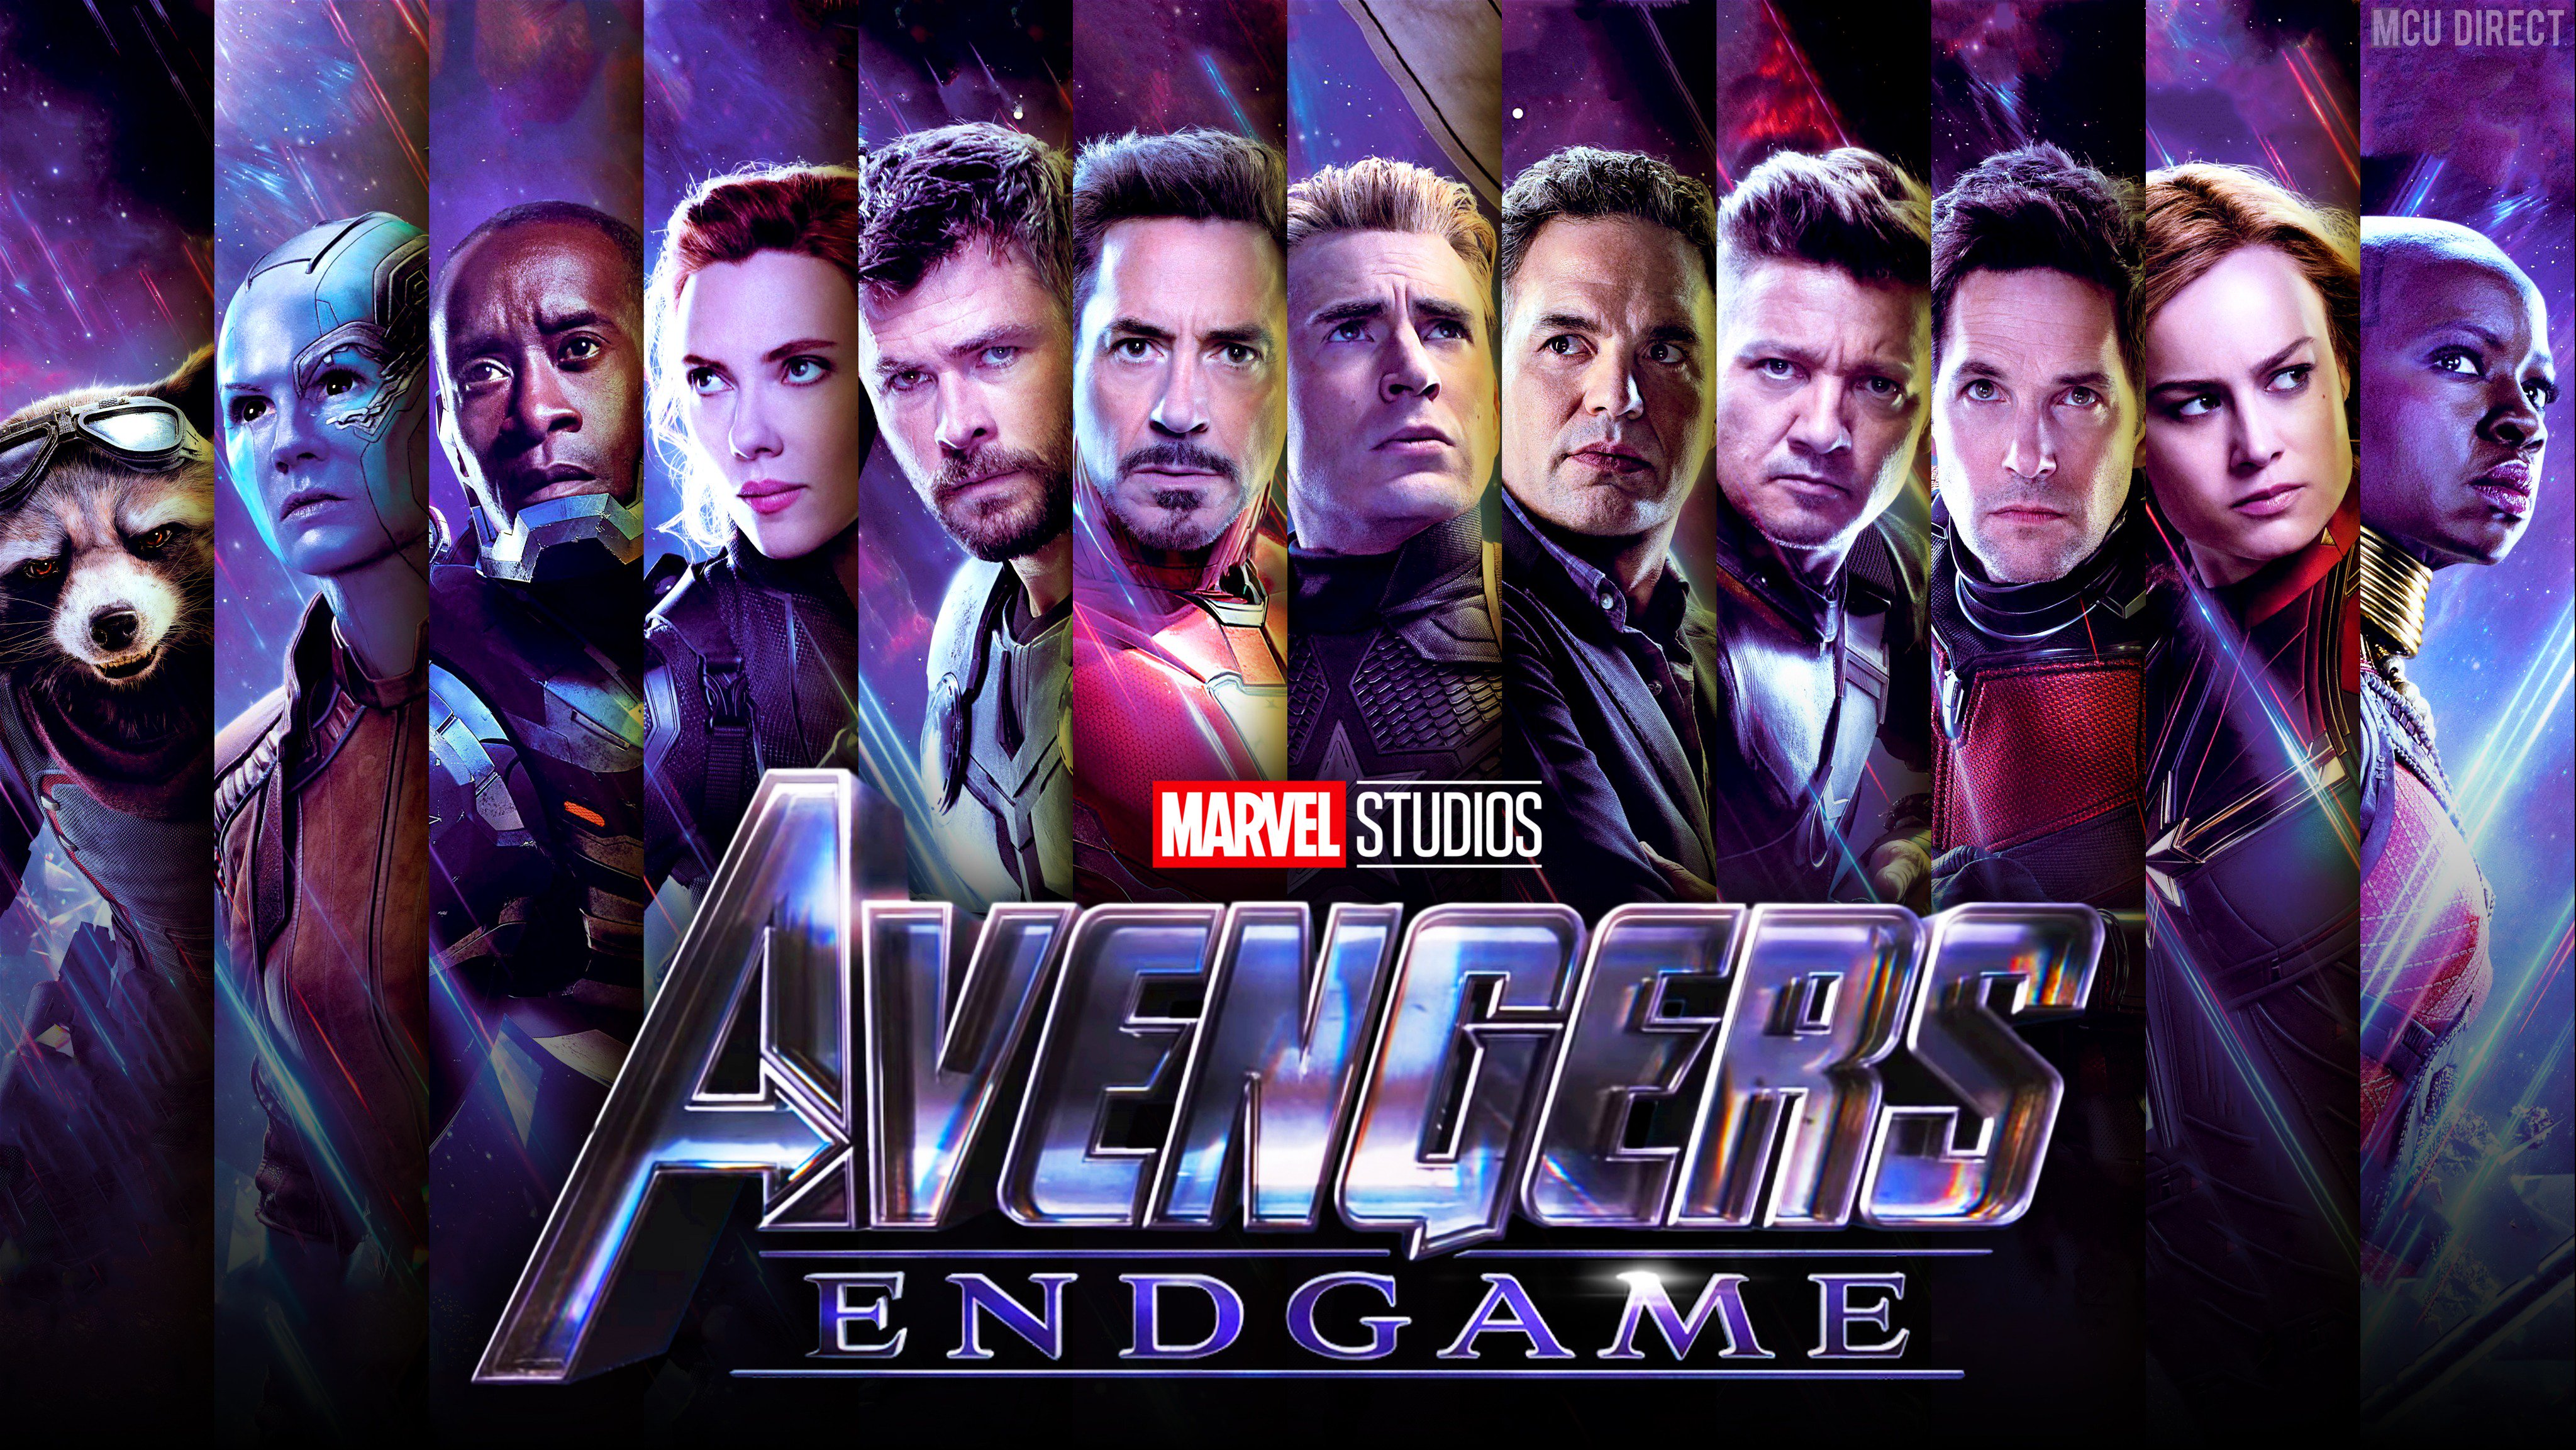 MCU - The on Twitter: "WARNING - MINOR #AvengersEndgame SPOILERS IN LINK: The amount of screen time each the main characters have in #Endgame has been https://t.co/mkWVGnRwAS https://t.co/f9pukd3Qdy" /